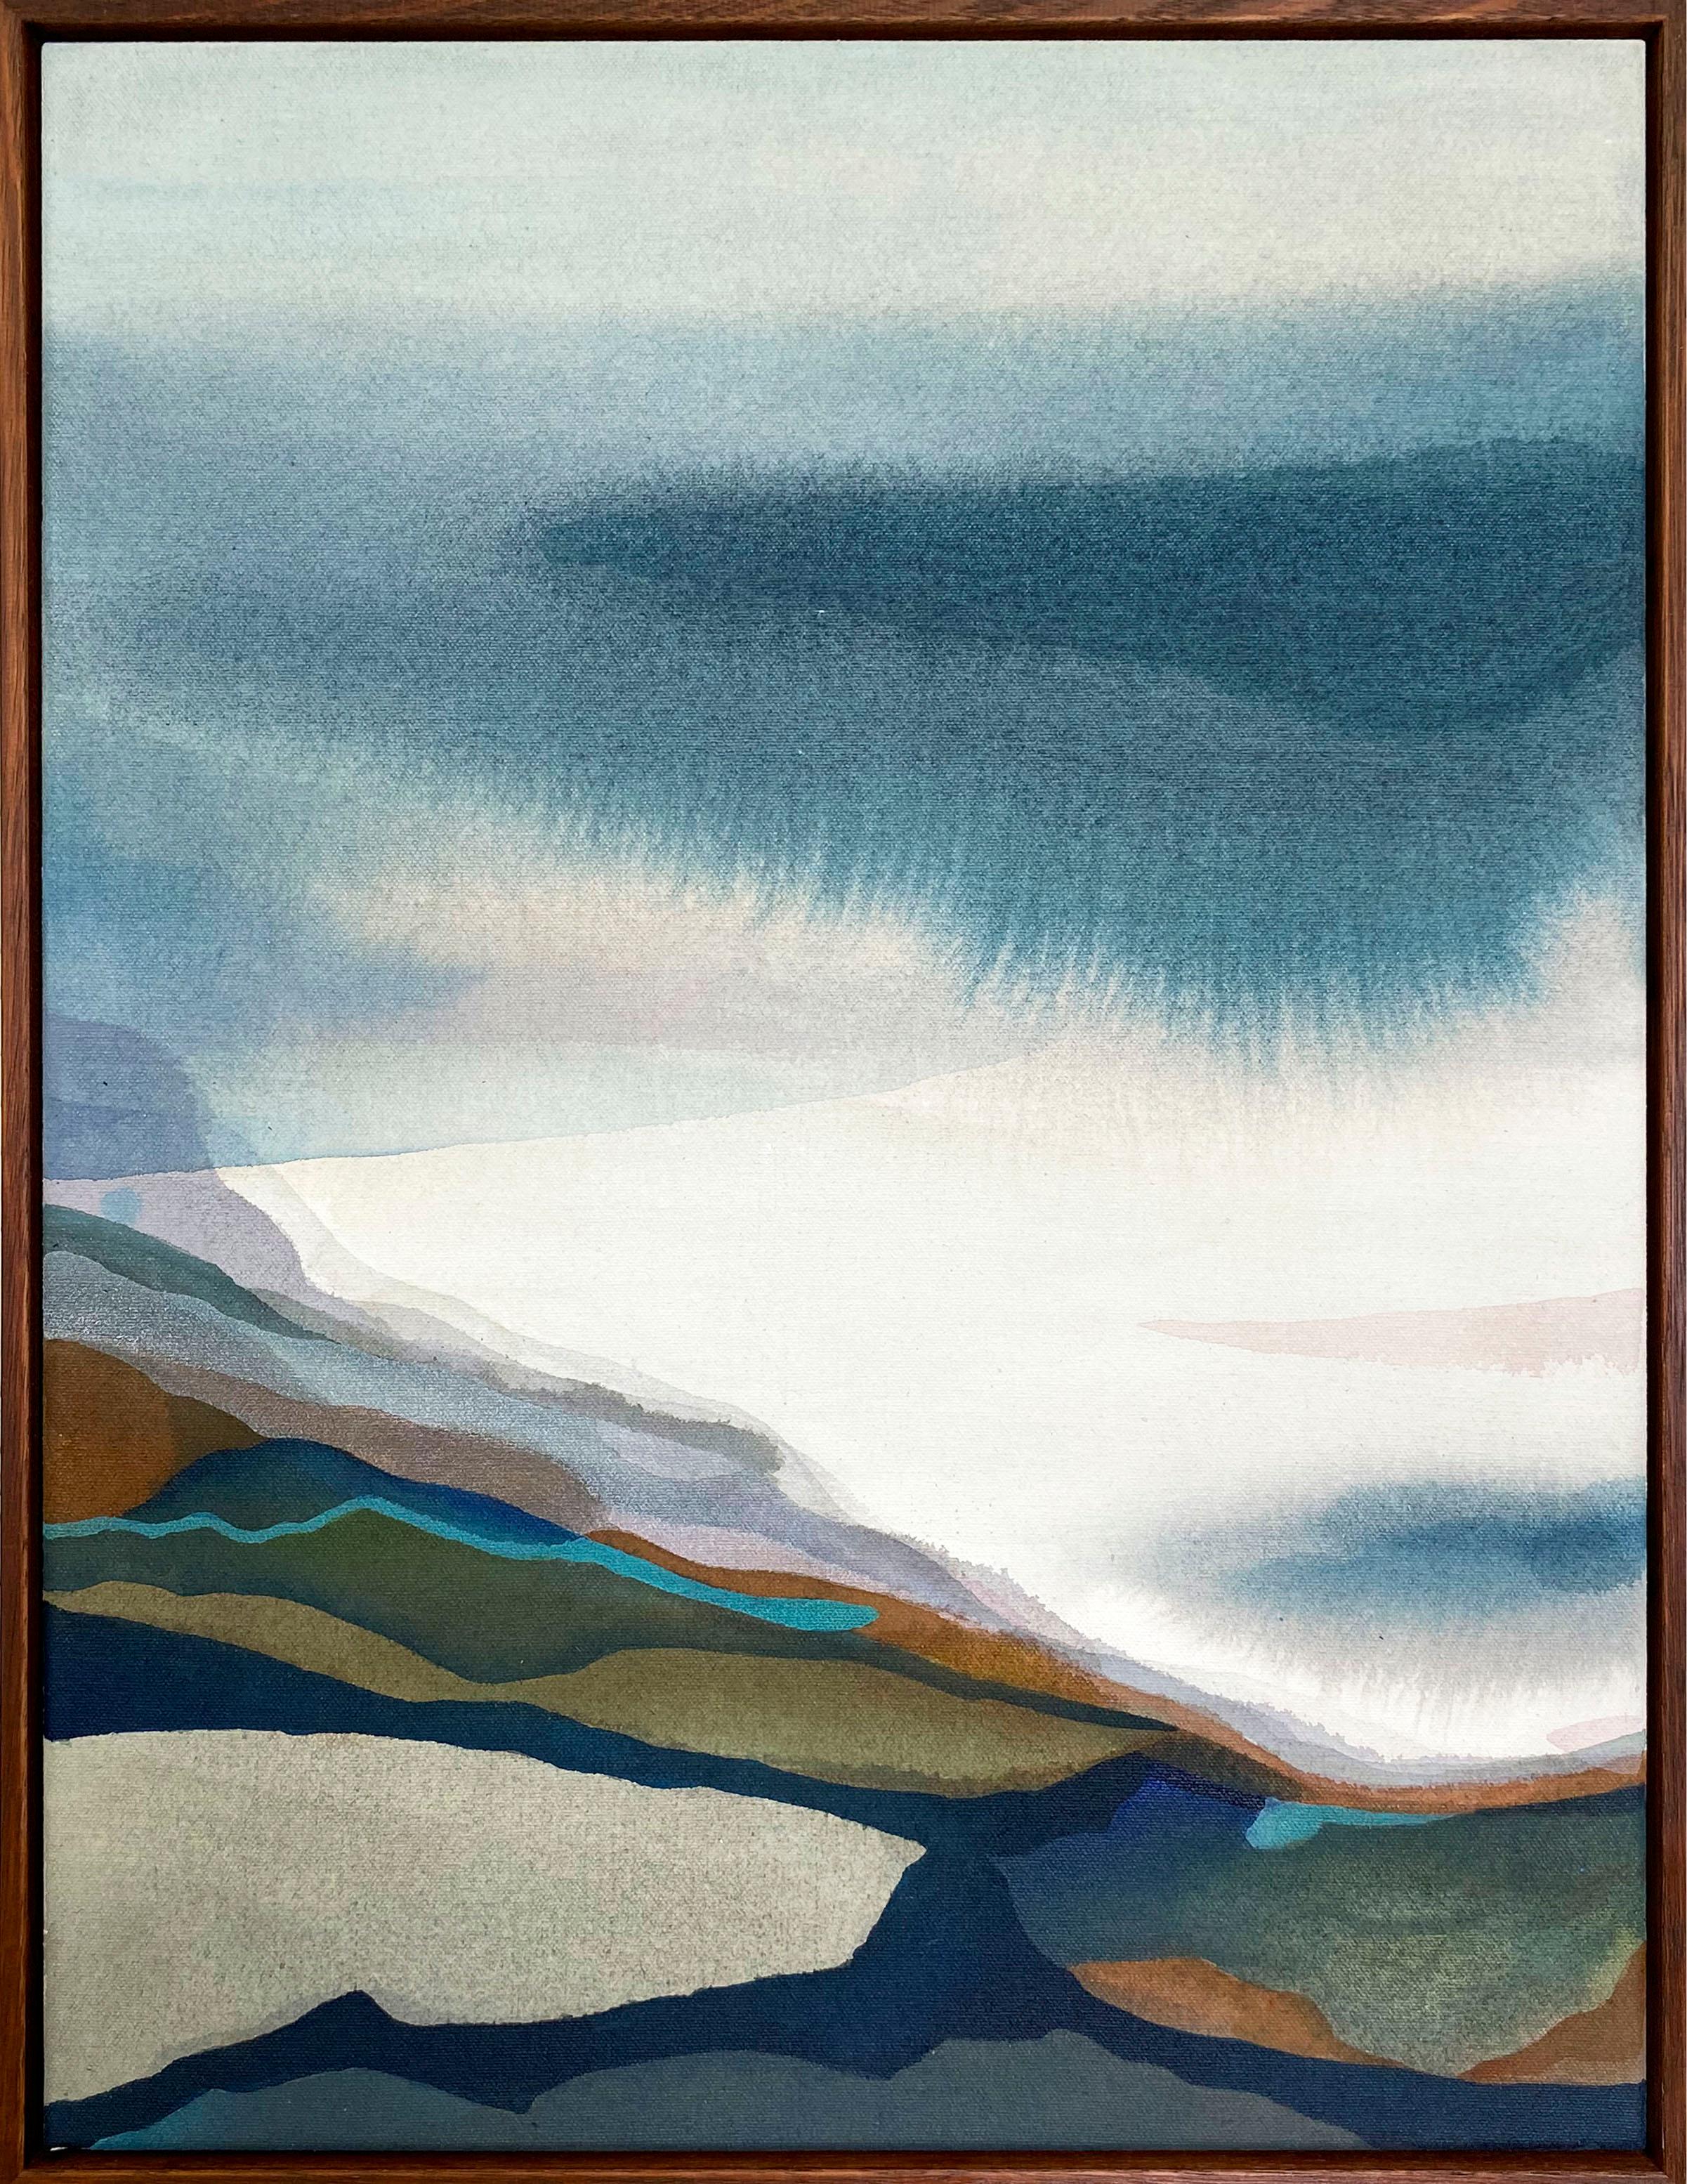 Quiet Composition #2, framed, contemporary landscape painting by Stefan Gevers